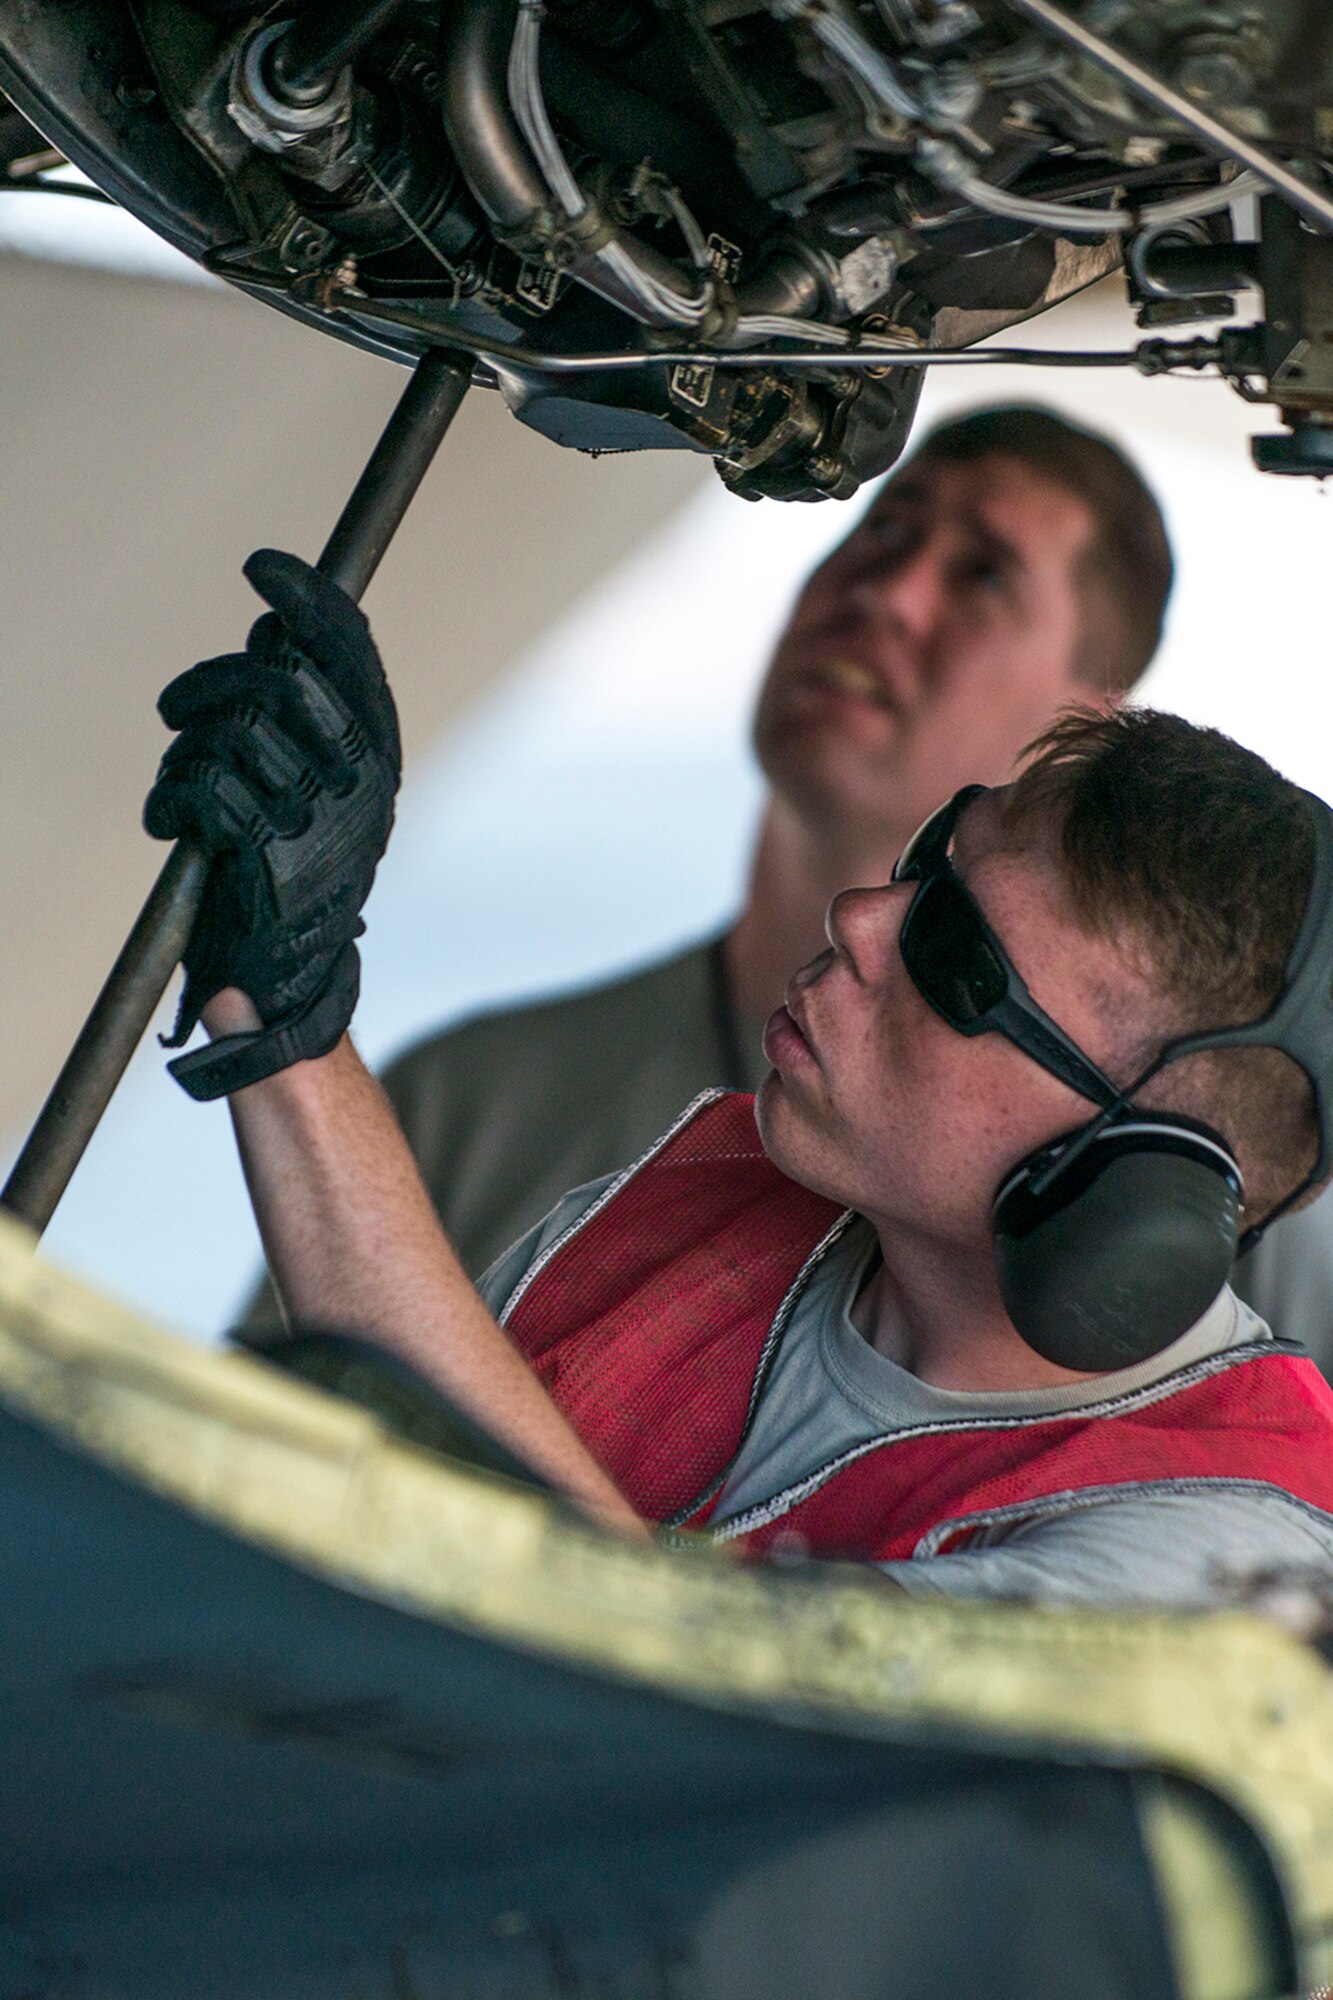 U.S. Air Force Airman First Class Jacob Lieuallen, a 11th Aircraft Maintenance Unit crew chief, installs a brace on the engine cowling of a B-52H Stratofortress in preparation for maintenance on June 8, 2016, Nellis Air Force Base, Nev. Lieuallen is among 45 Active Duty and Air Force Reserve maintenance personnel on temporary duty at Nellis in support of the 340th Weapons Squadron. (U.S. Air Force photo by Master Sgt. Greg Steele/Released)